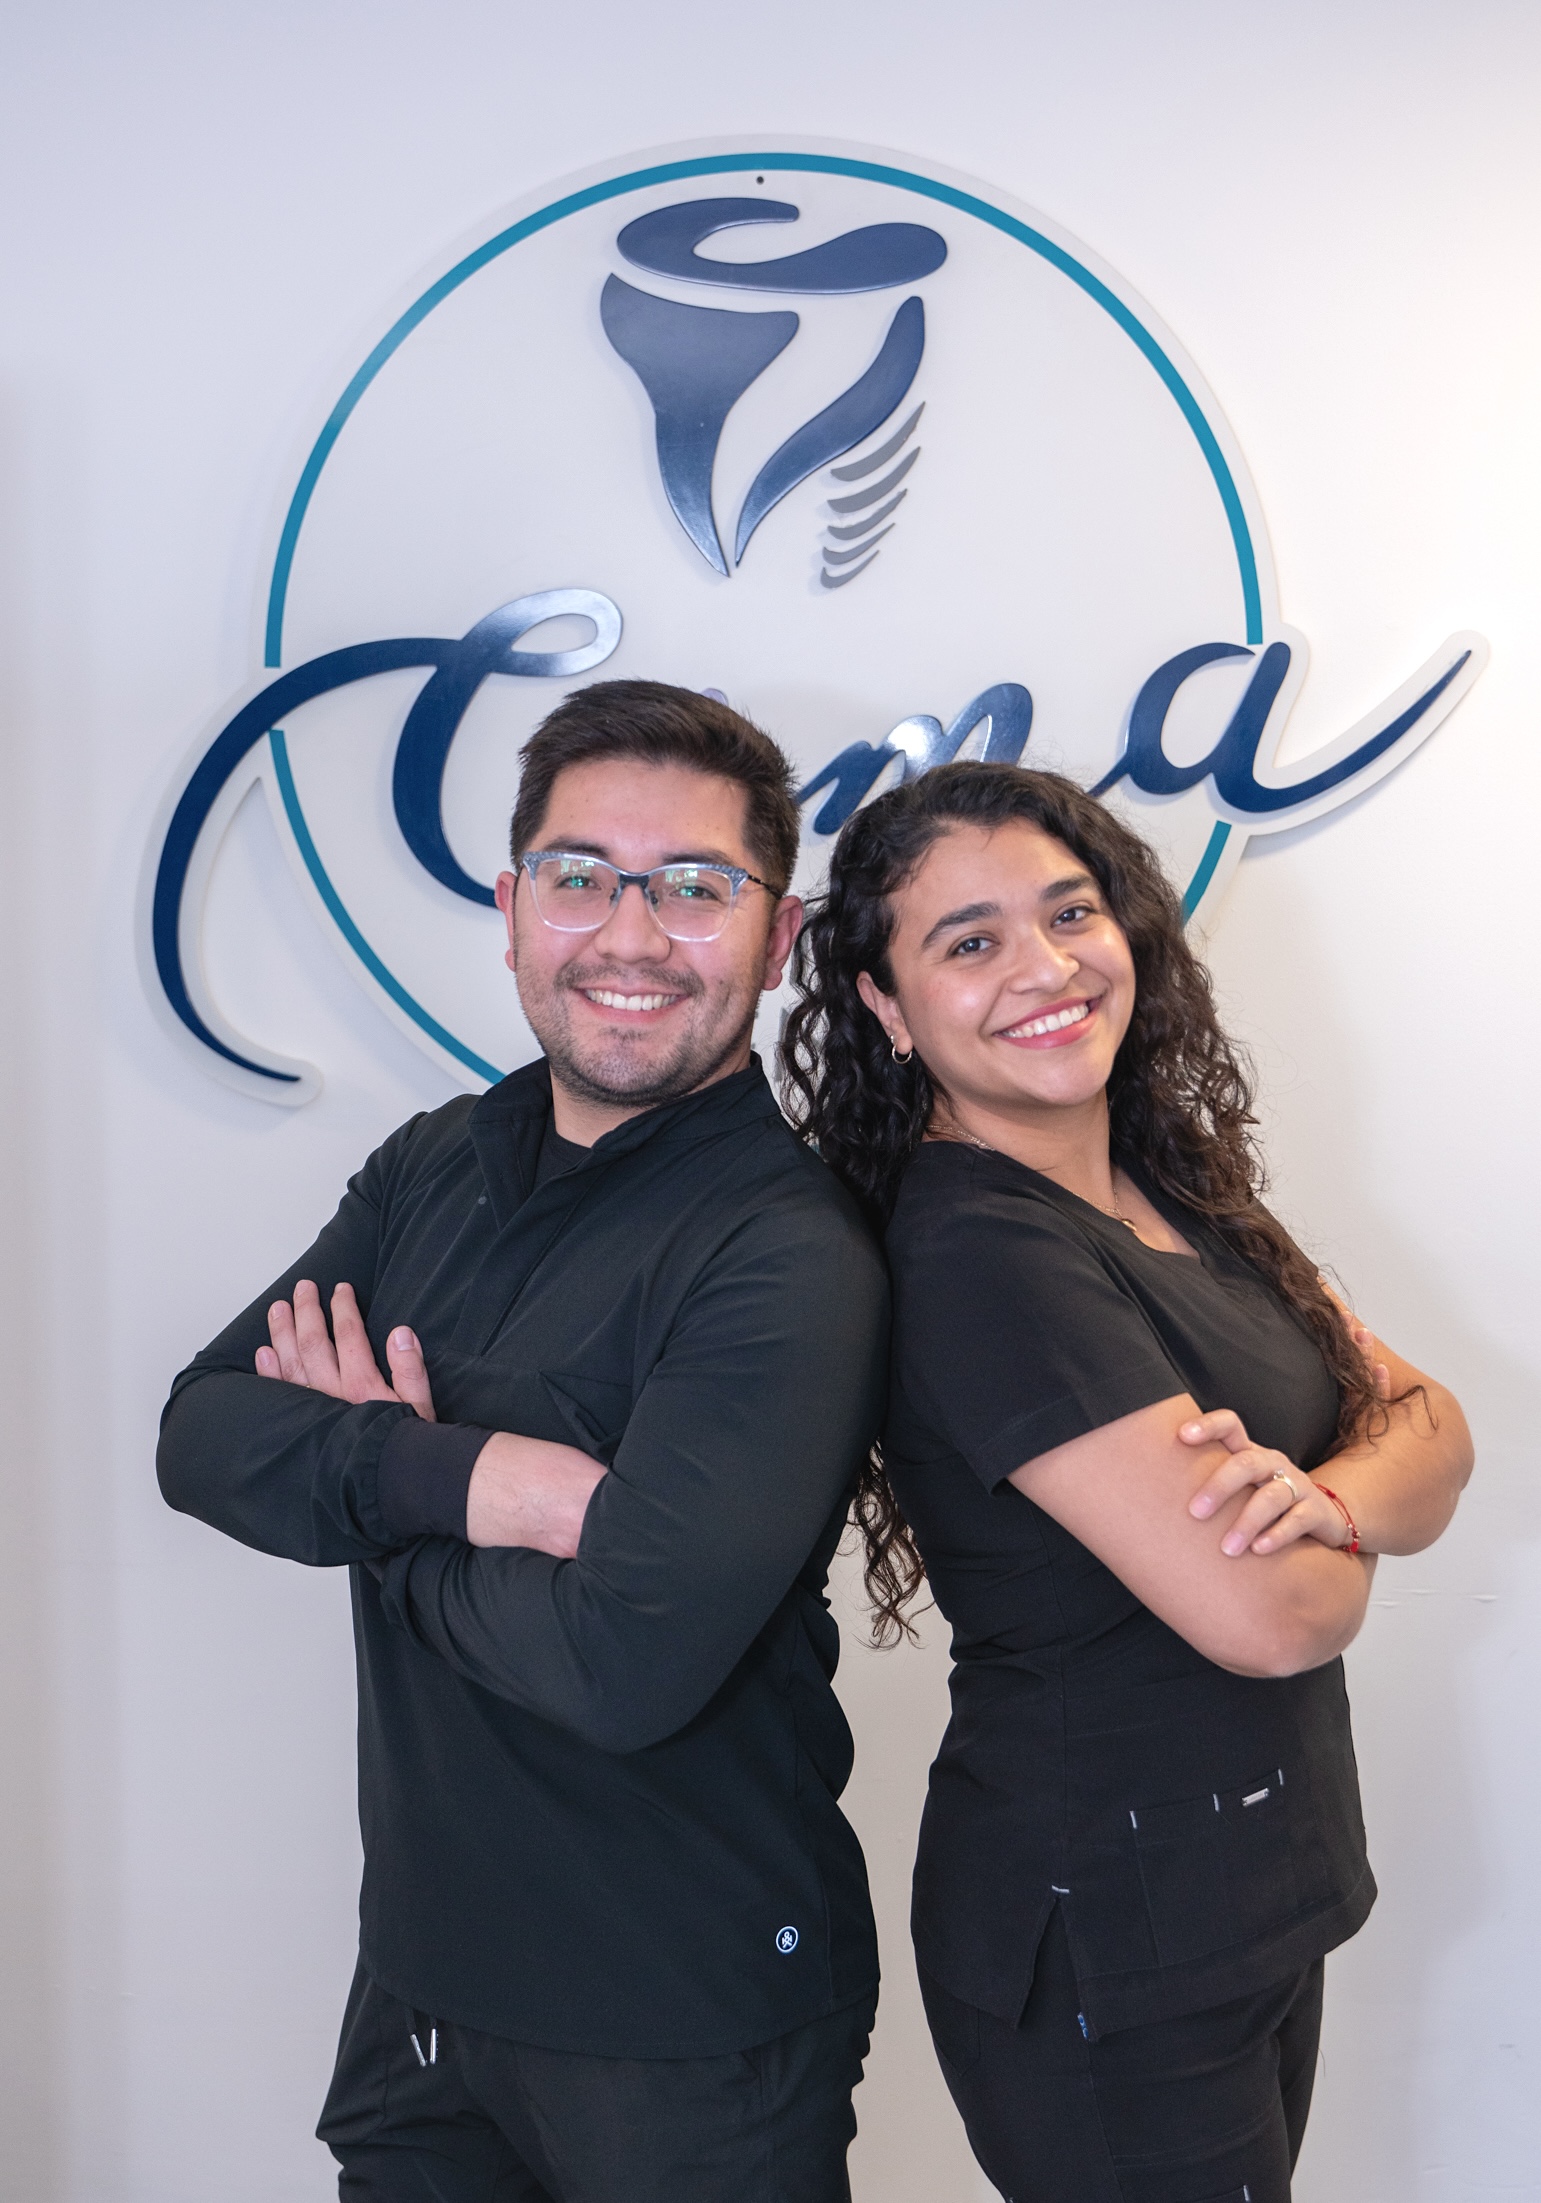 CIMA is an affordable Dental Surgery Clinic Tijuana with top quality and affordable services for your family’s dental care needs